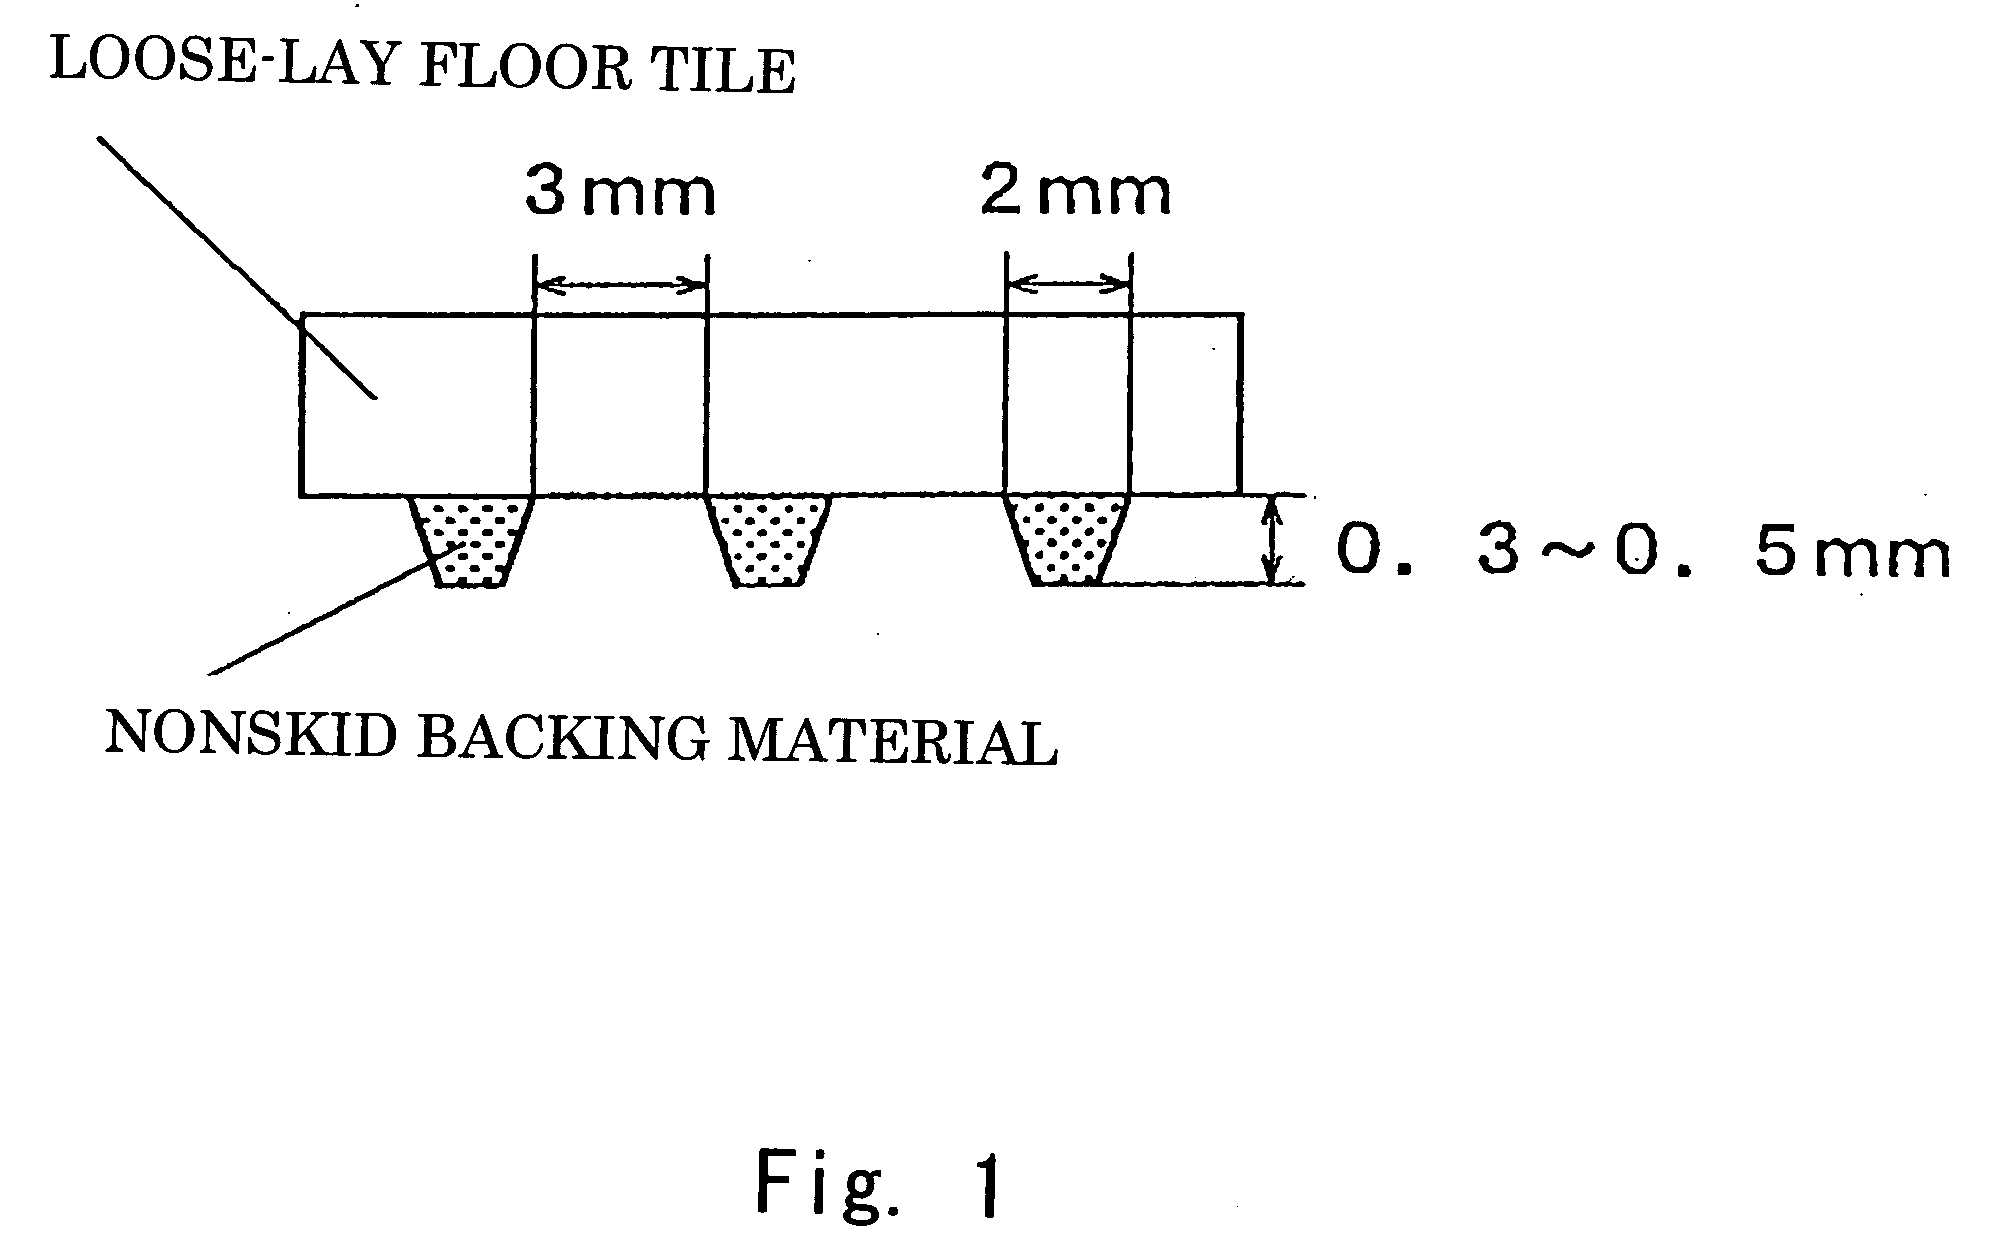 Free laying floor tile having pvc based backing material for preventing tile from slipping provided on back surface thereof